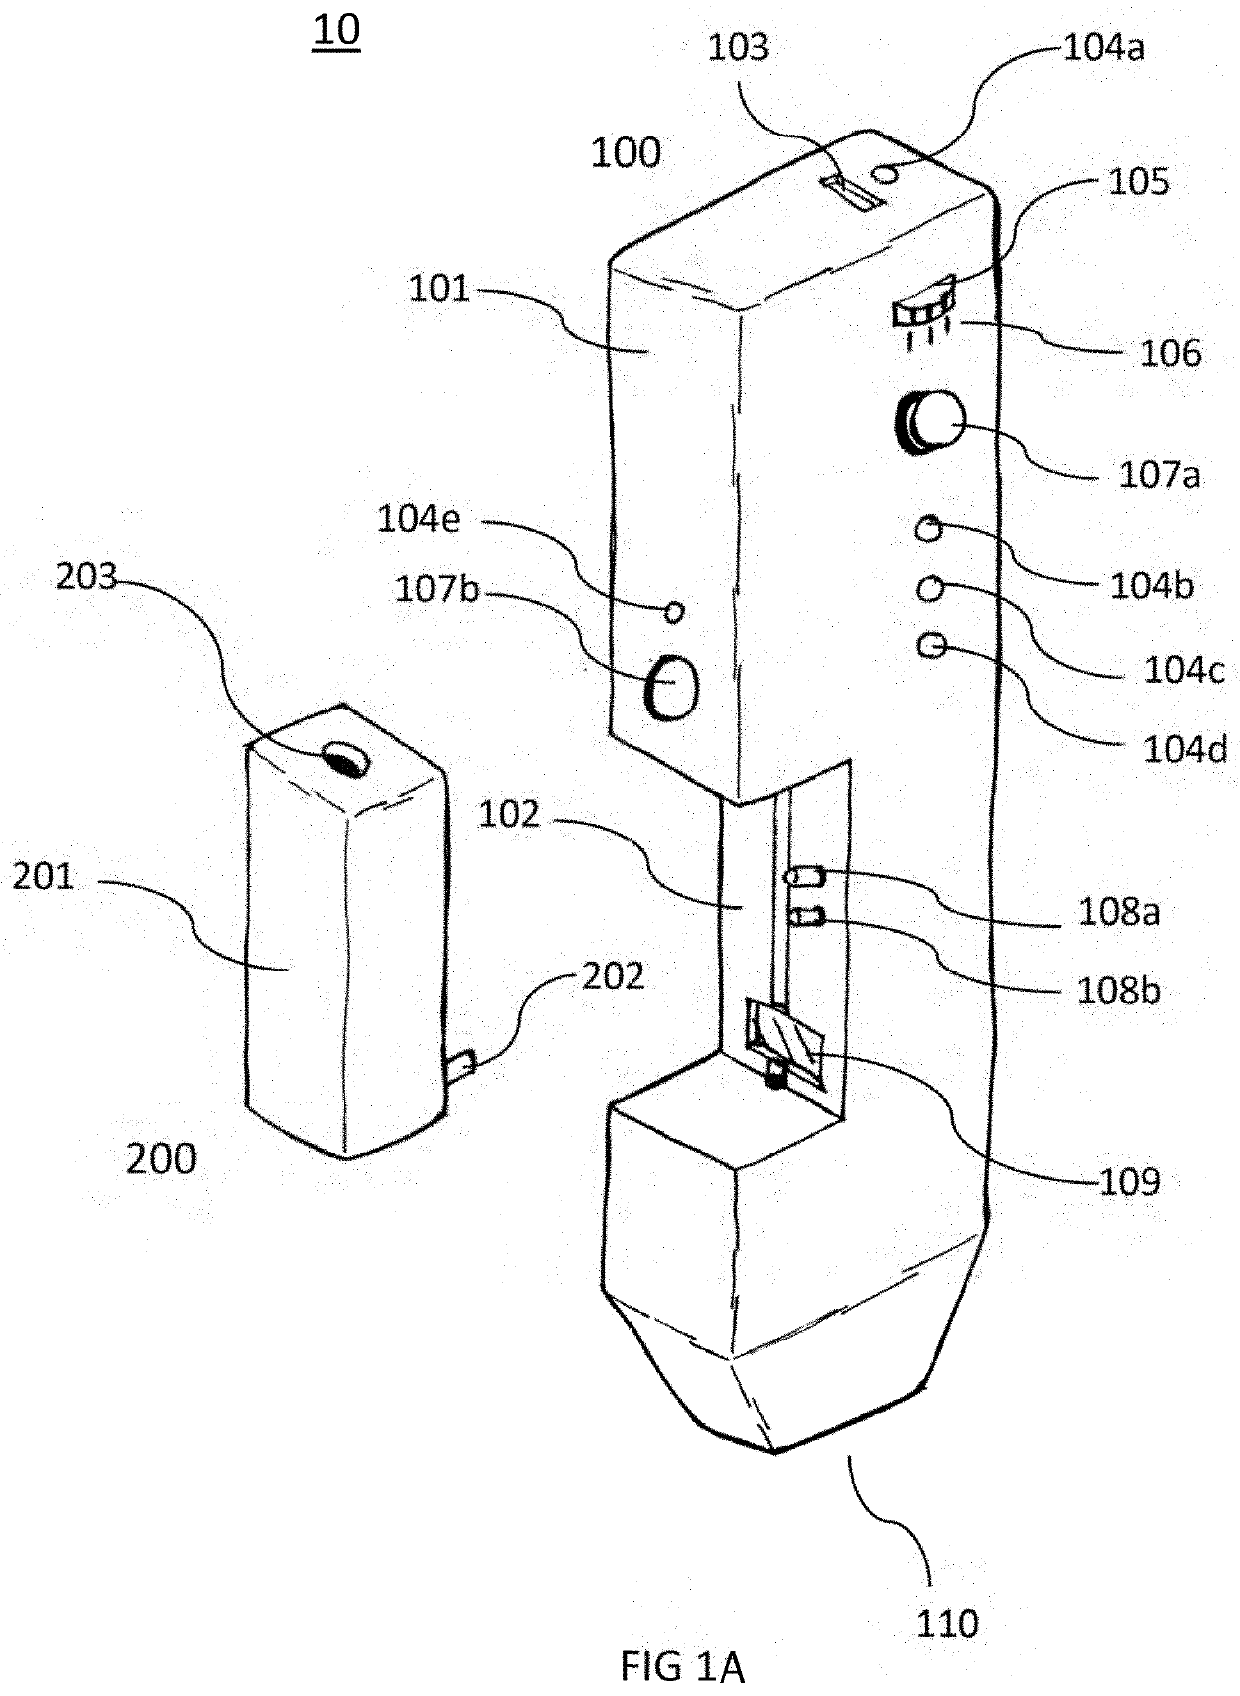 System for analyzing and controlling consumable media dosing information